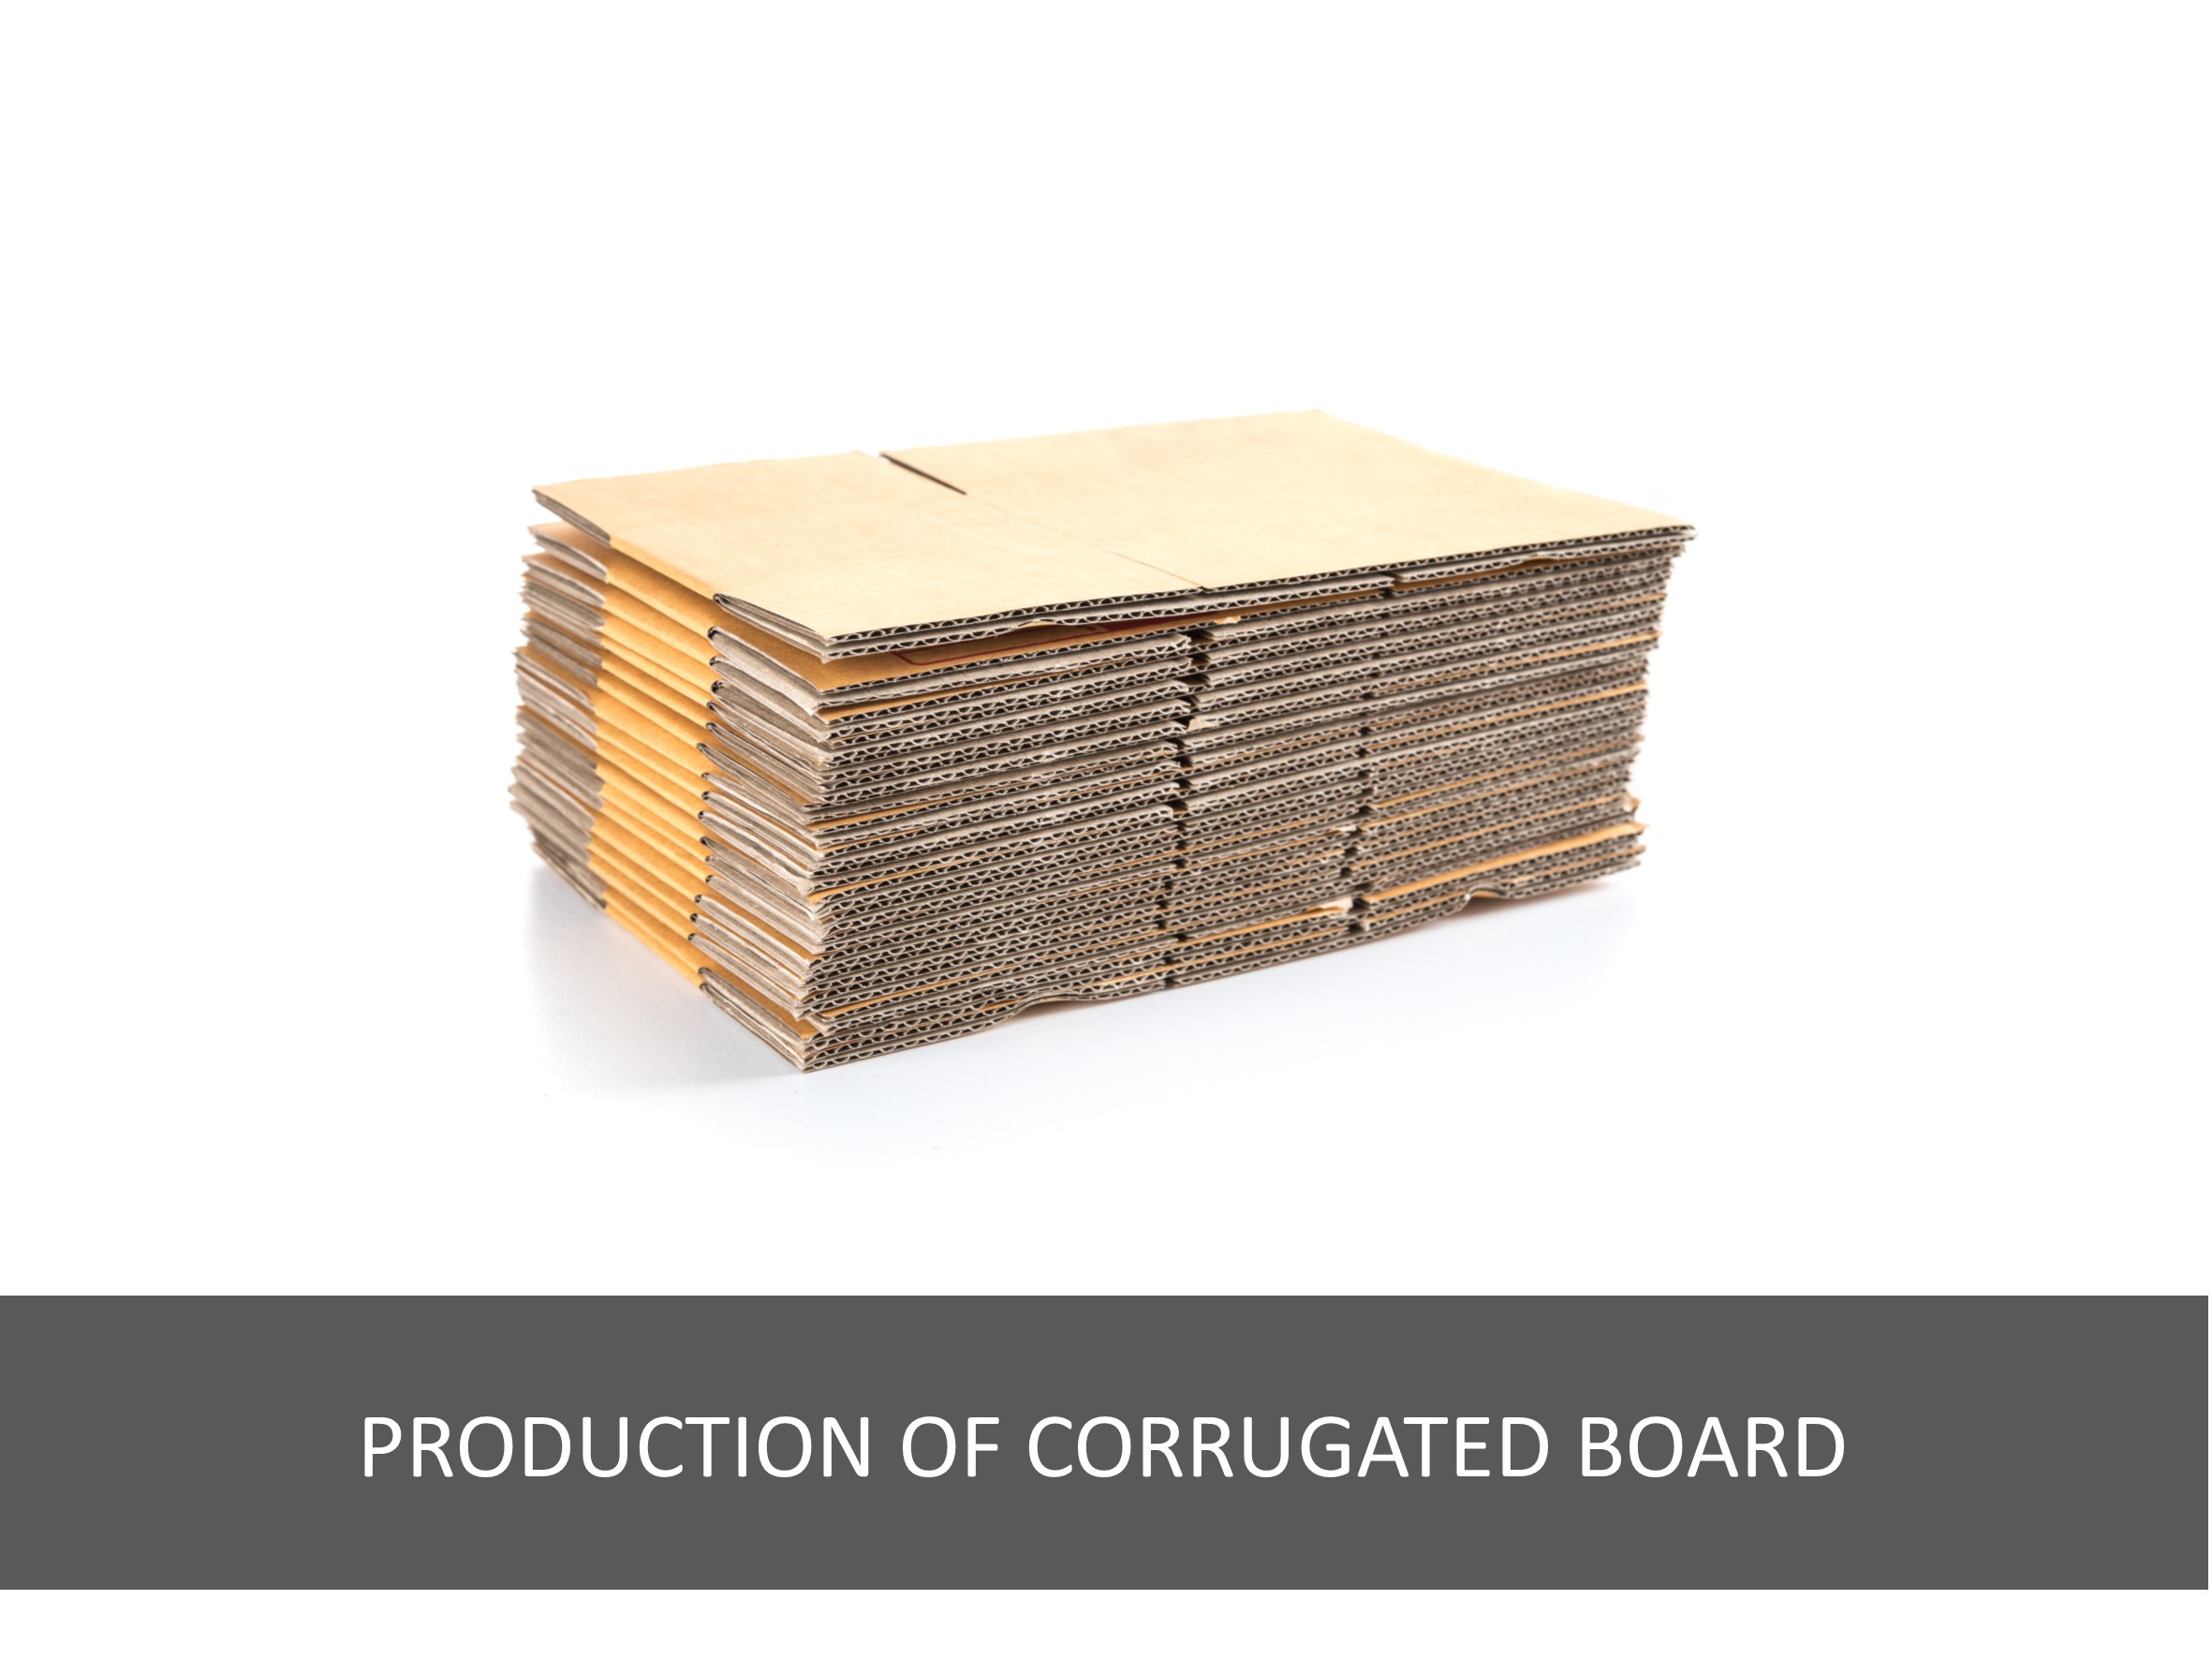 Production of corrugated board